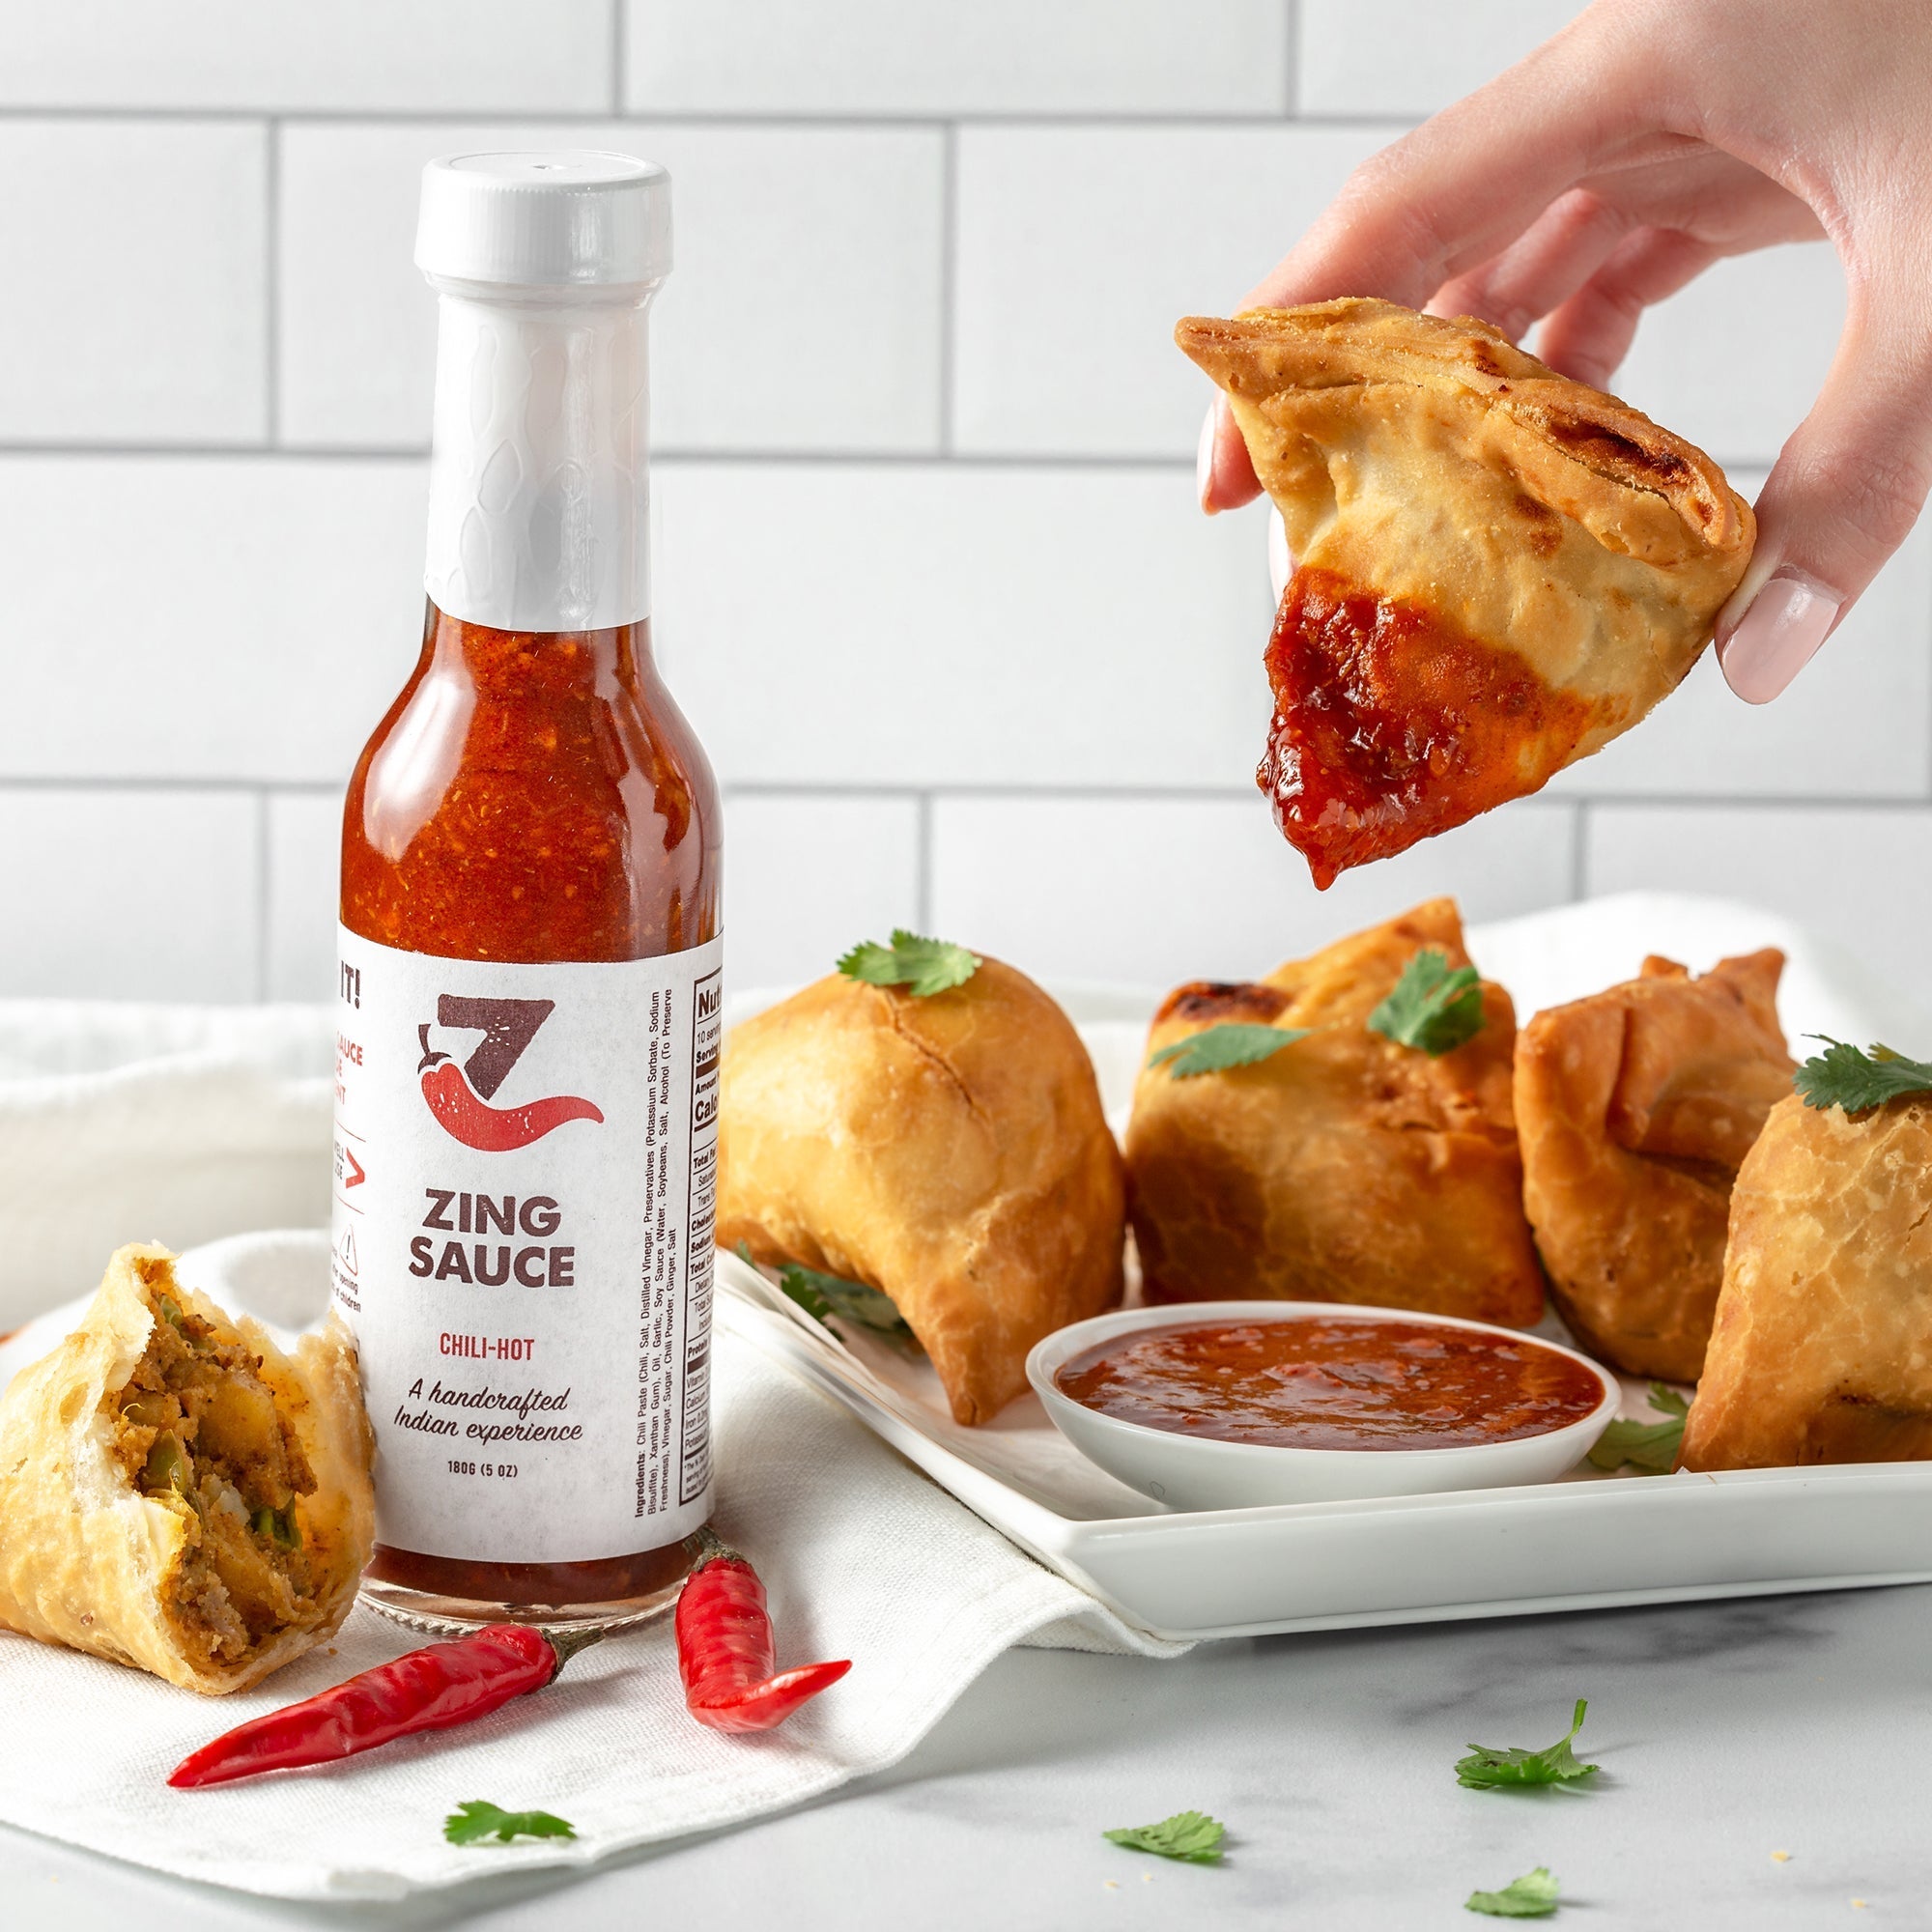 Sauce Squeeze Bottle - No MSG (Flavors: Mint, Curry, Garlic, PeriPeri, Chili), Size: 275 ml